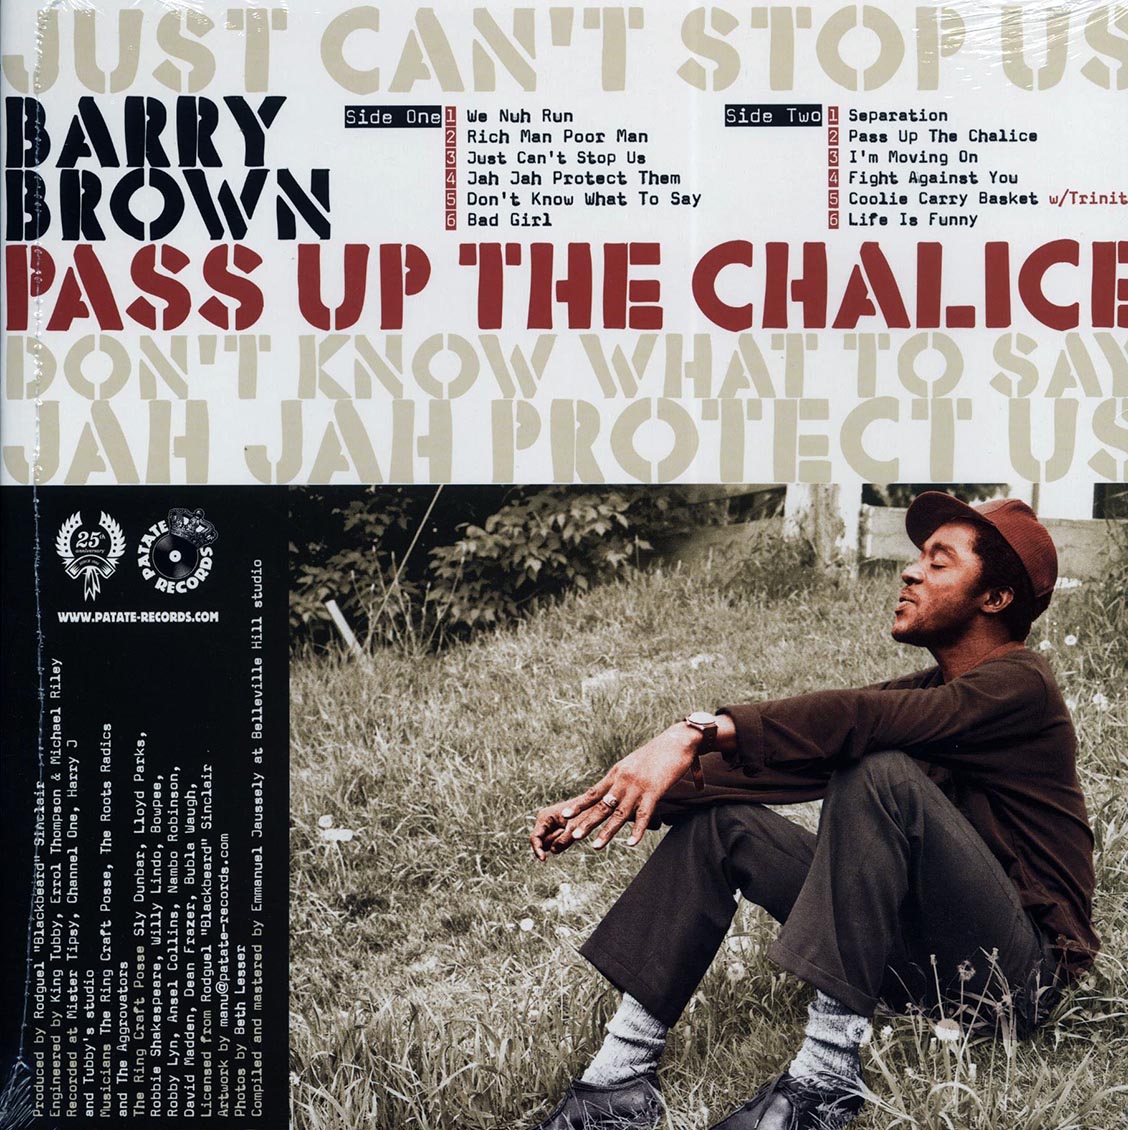 Barry Brown - Pass Up The Chalice: The Blackbeard Years 1978-1983